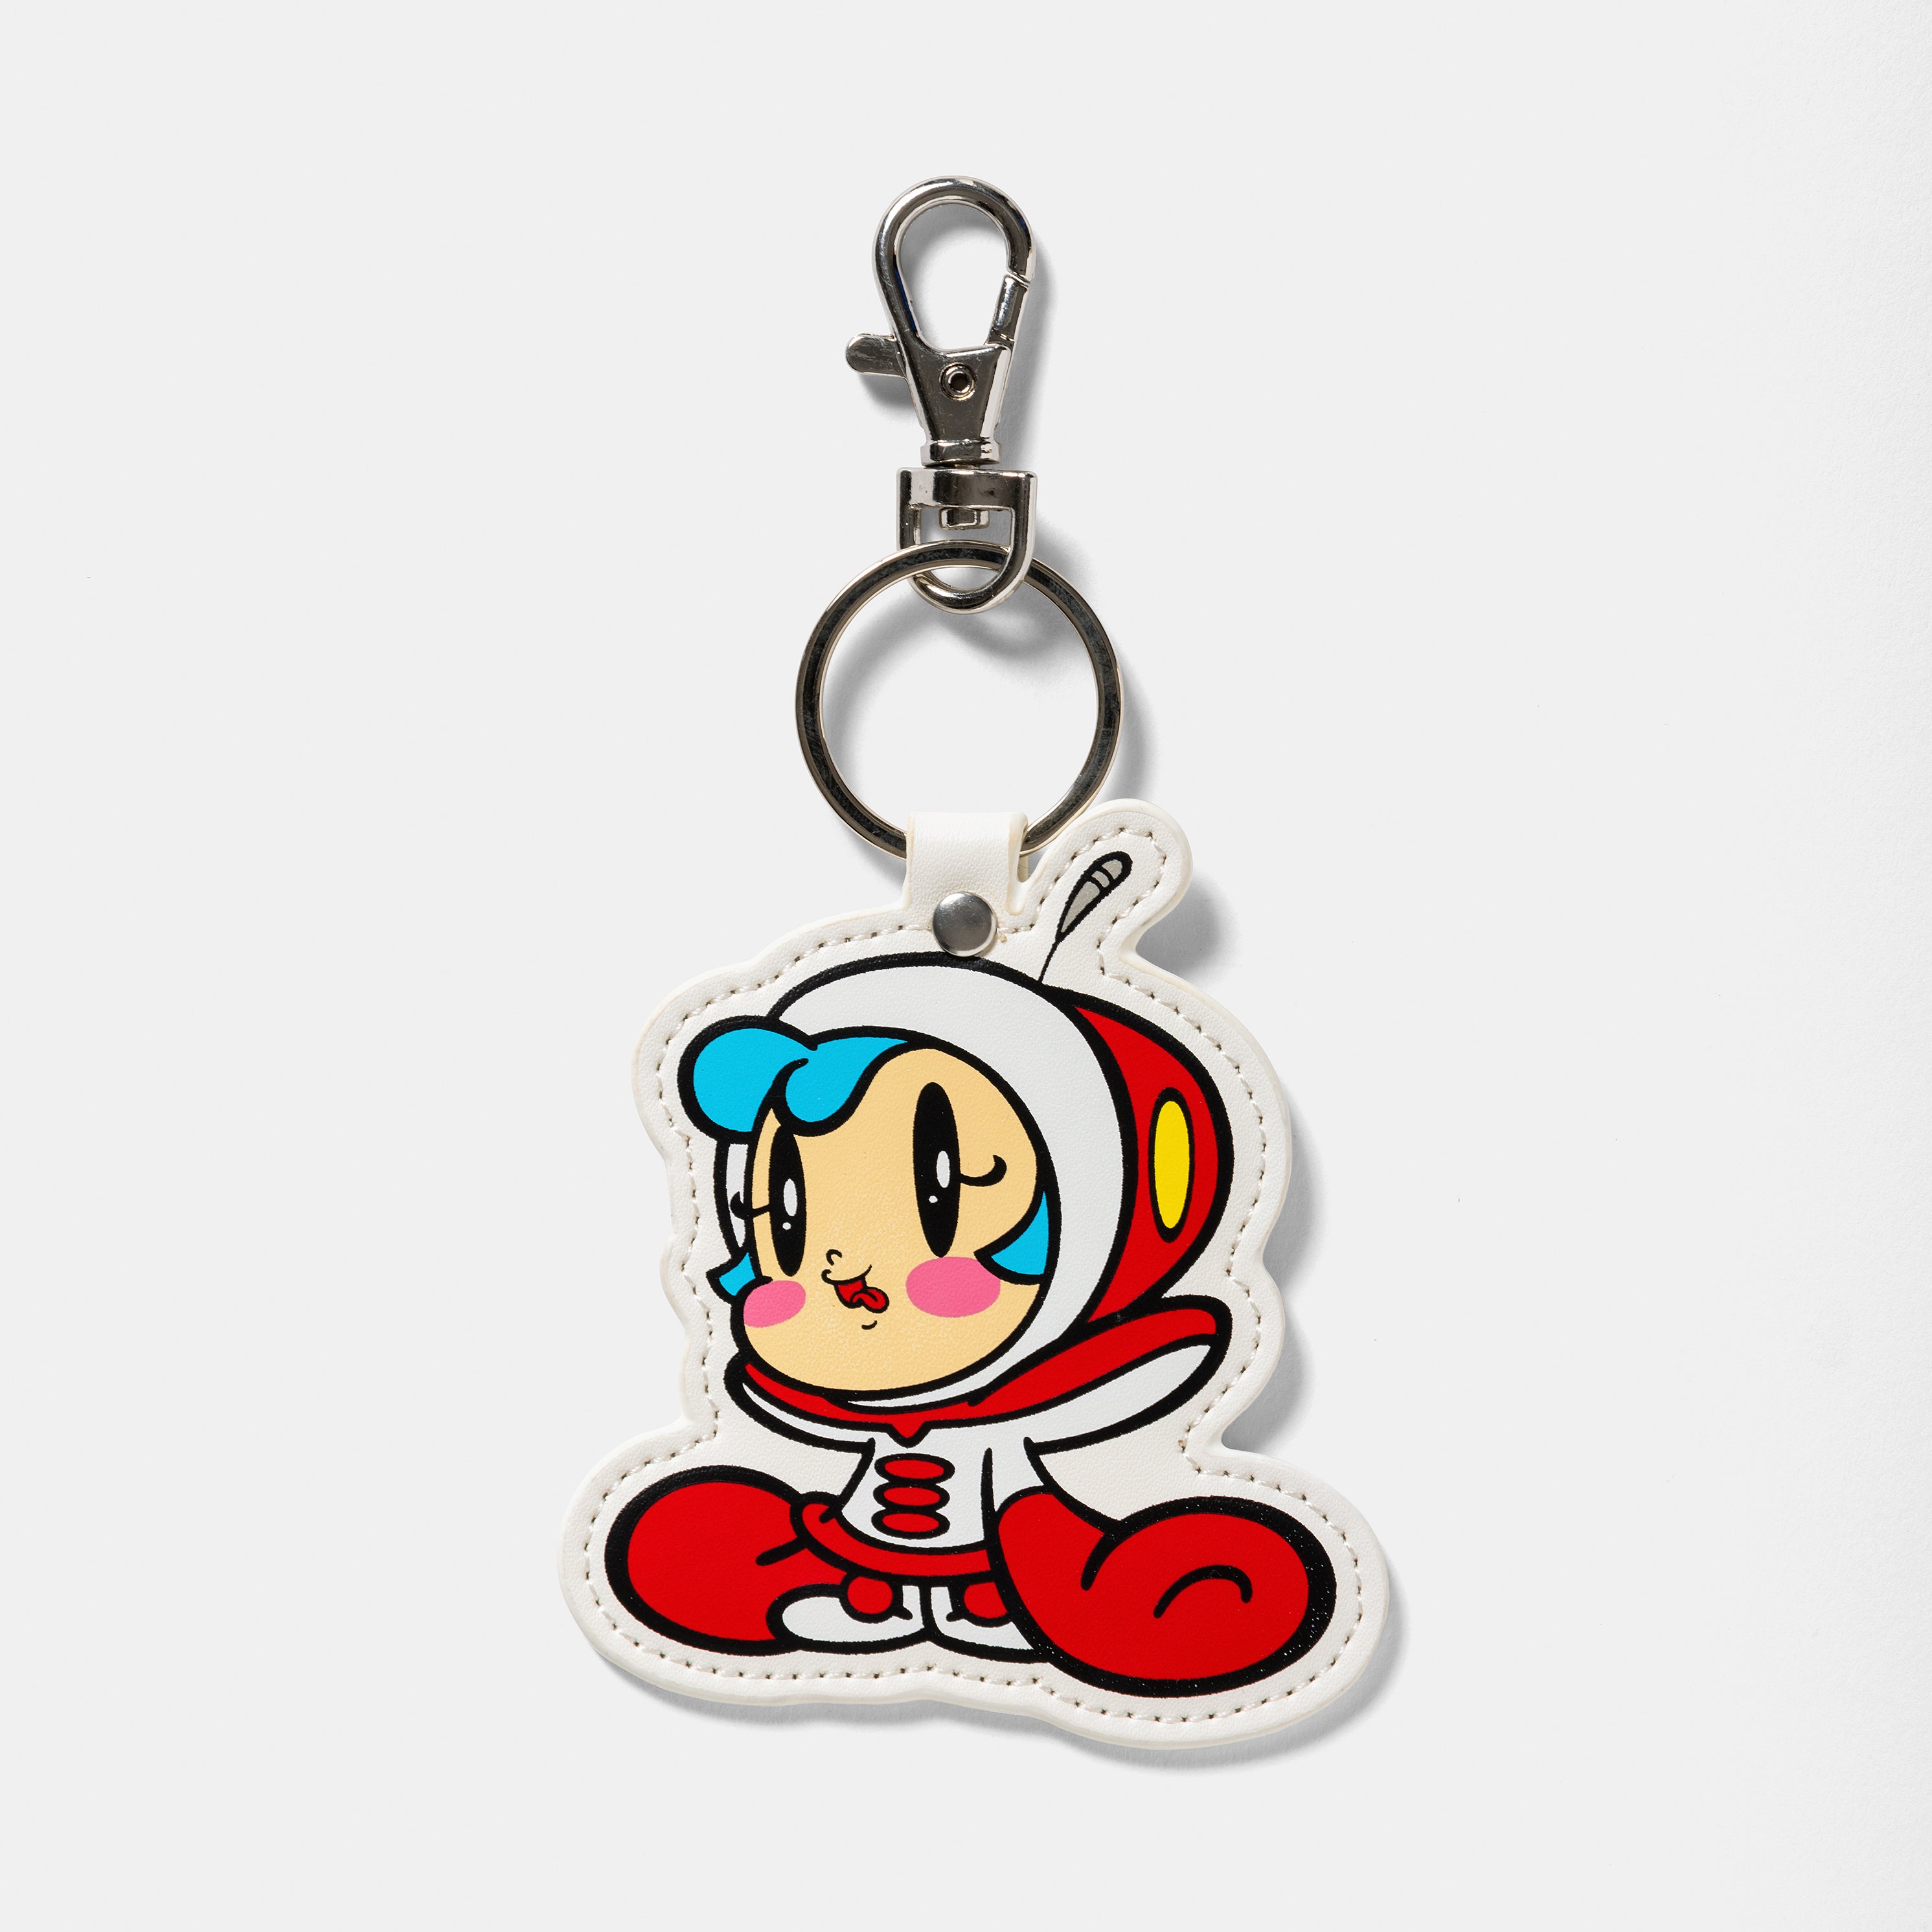 Synthetic key chain